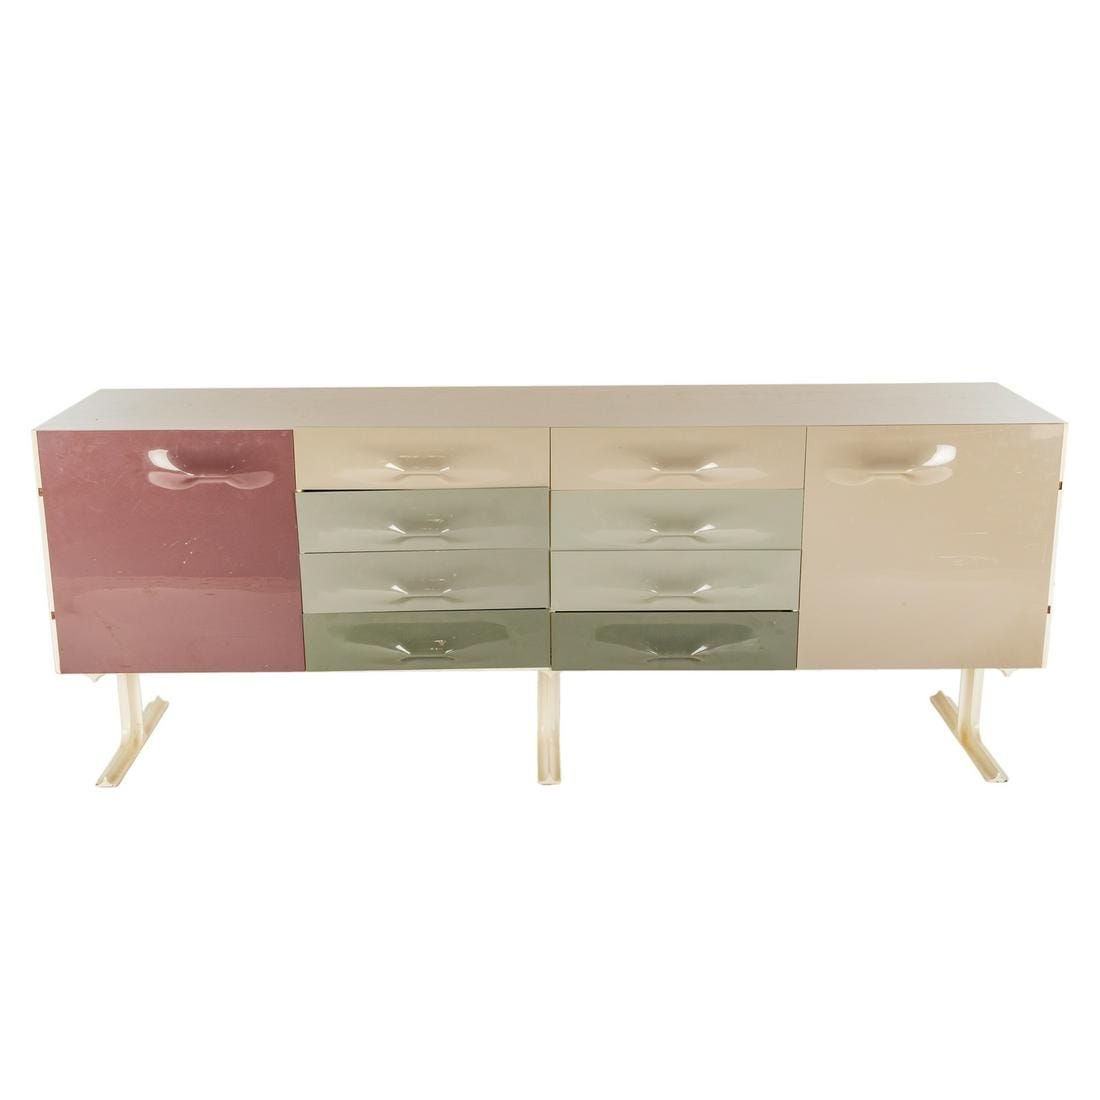 Raymond Loewy Style Credenza, by Organic Modernism